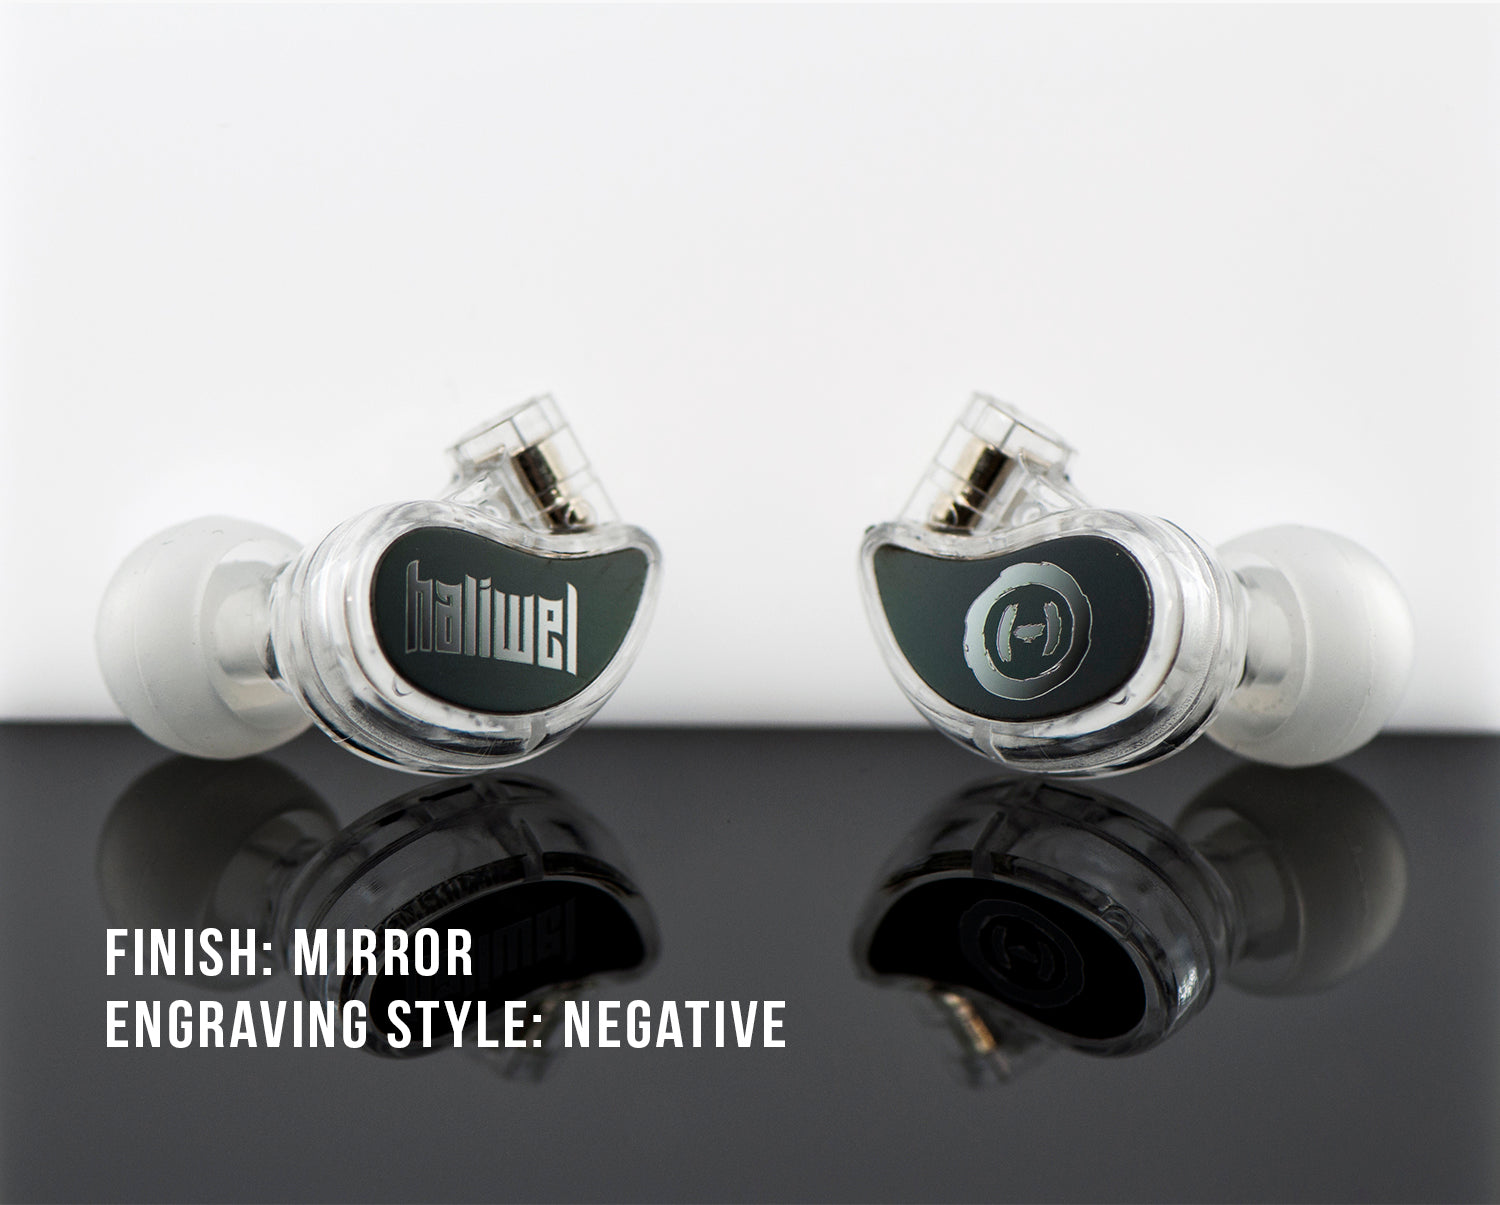 Two custom in-ear monitors with a mirror finish and negative engraving, displaying logos, reflected on a shiny surface with text descriptions.